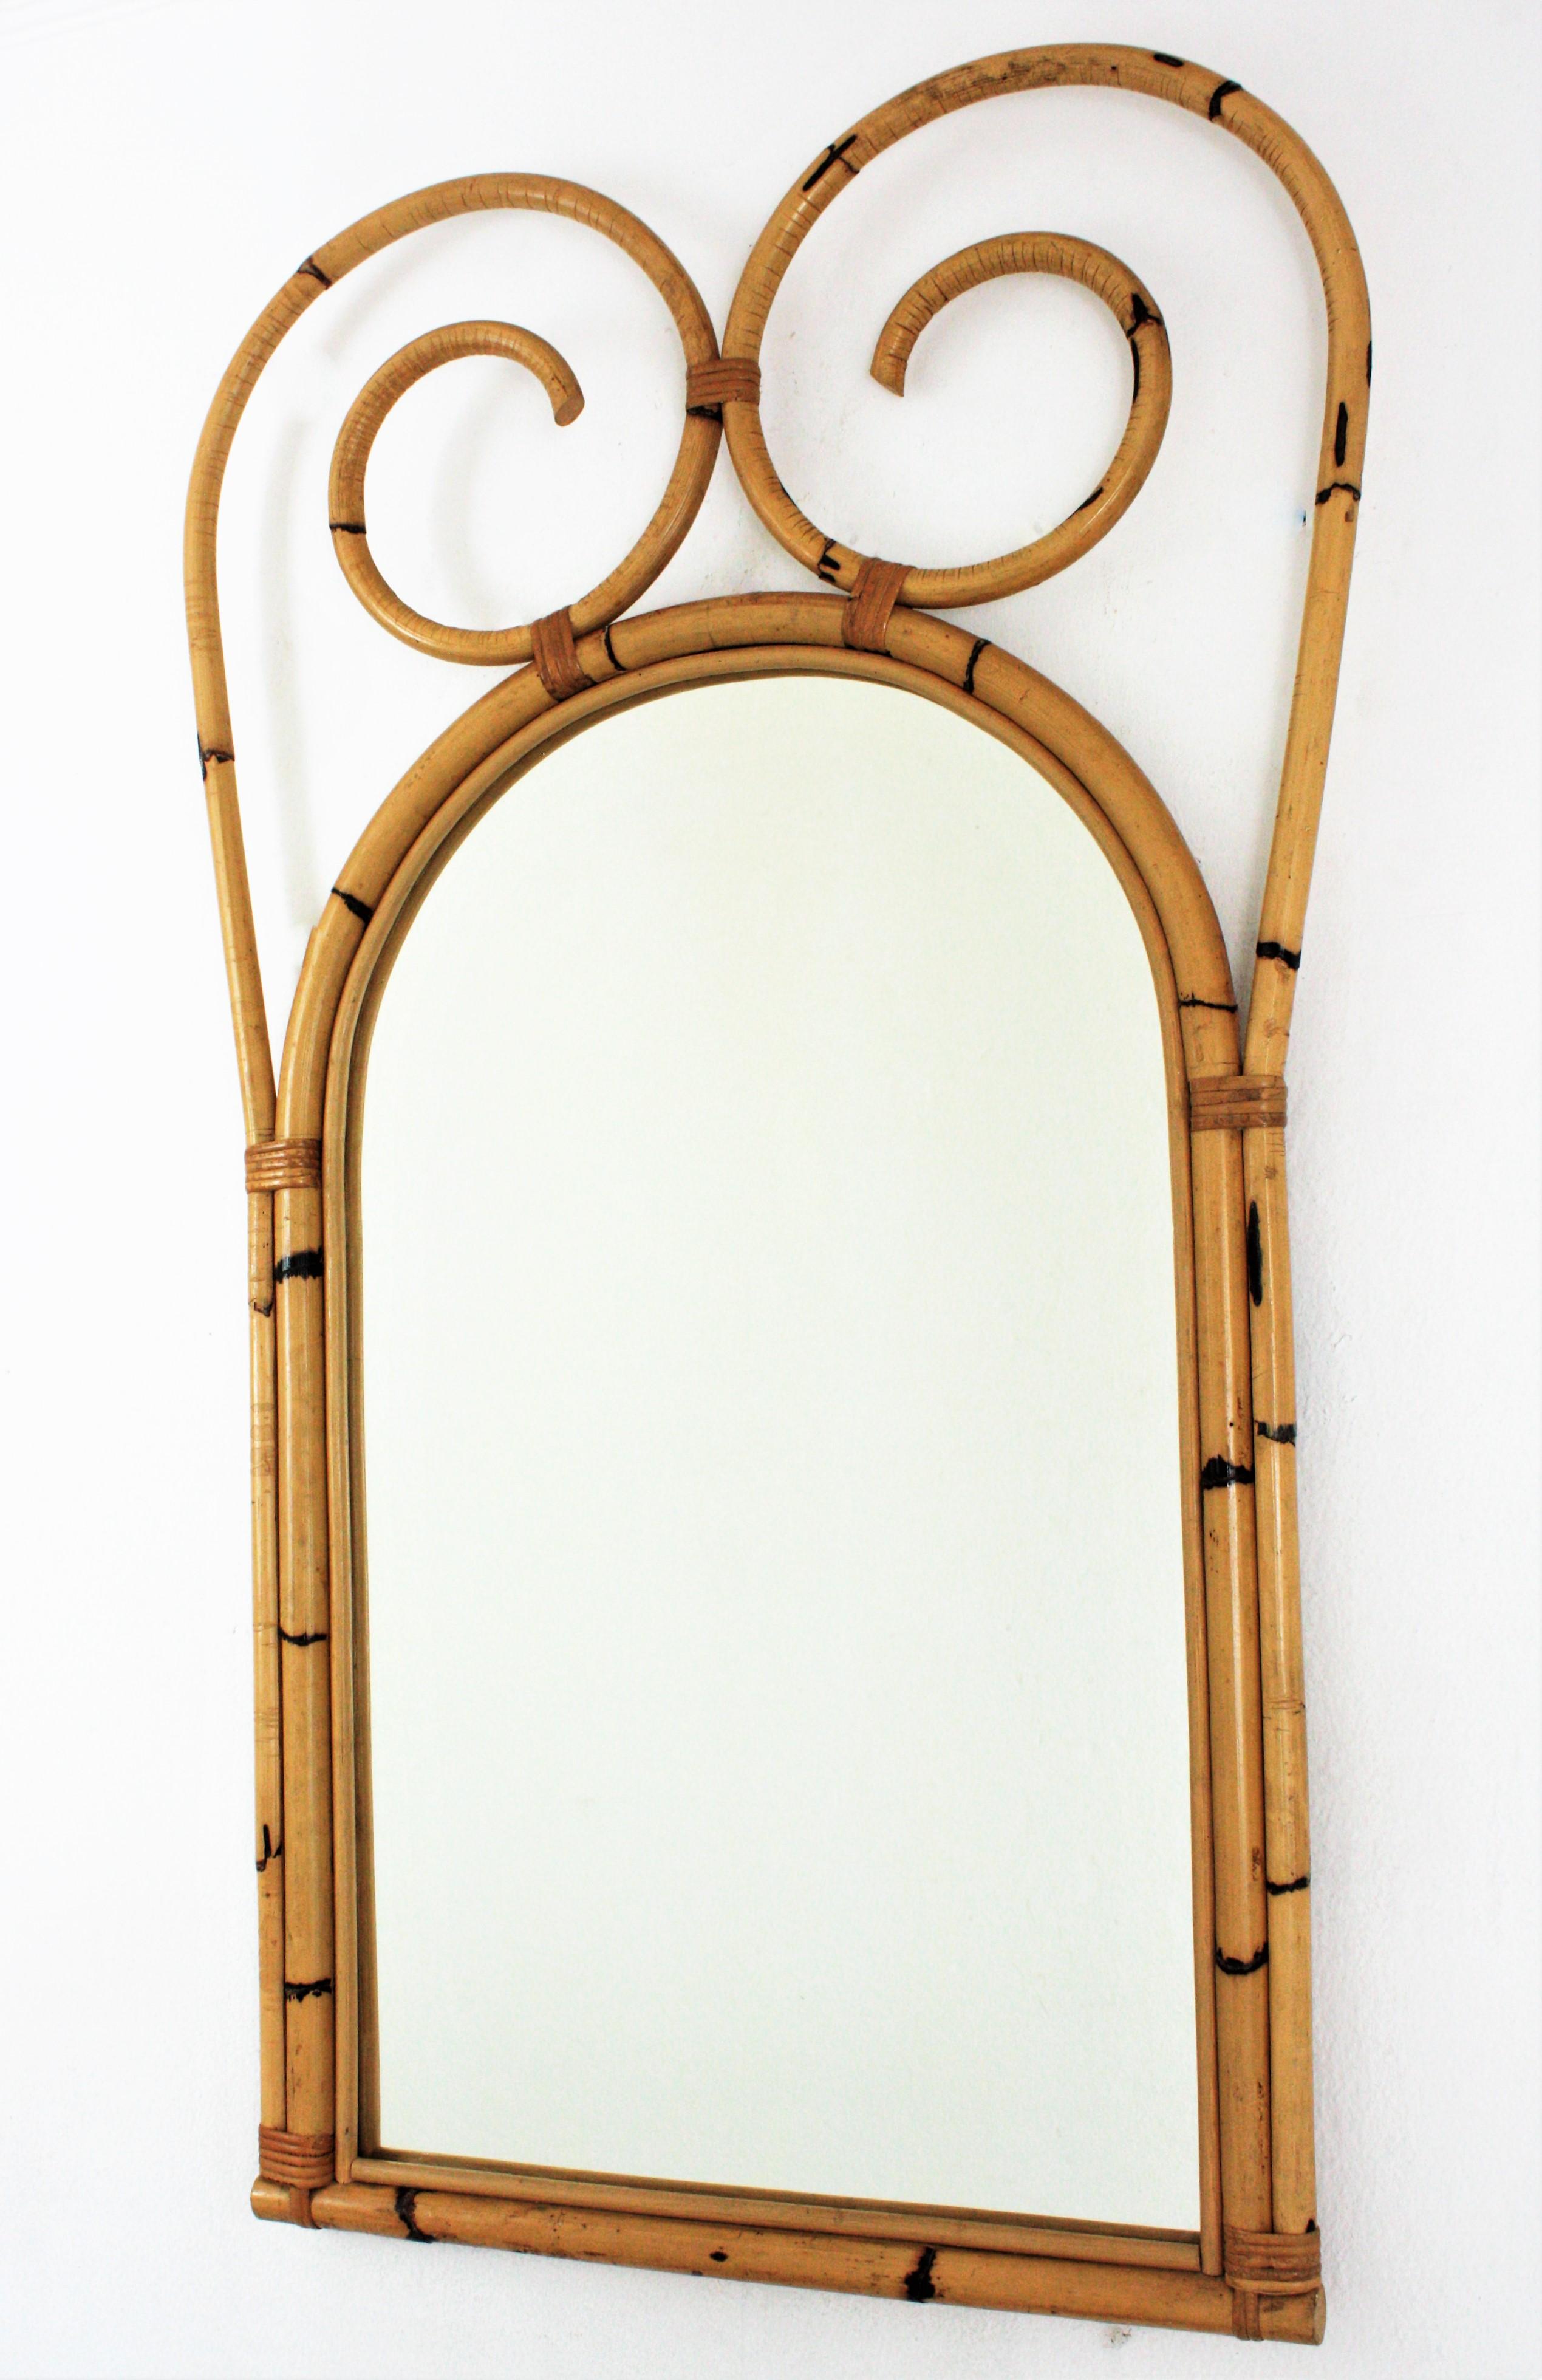 20th Century Large Rattan Bamboo Wall Mirror with Scroll Top, Italian Designer, 1950s For Sale